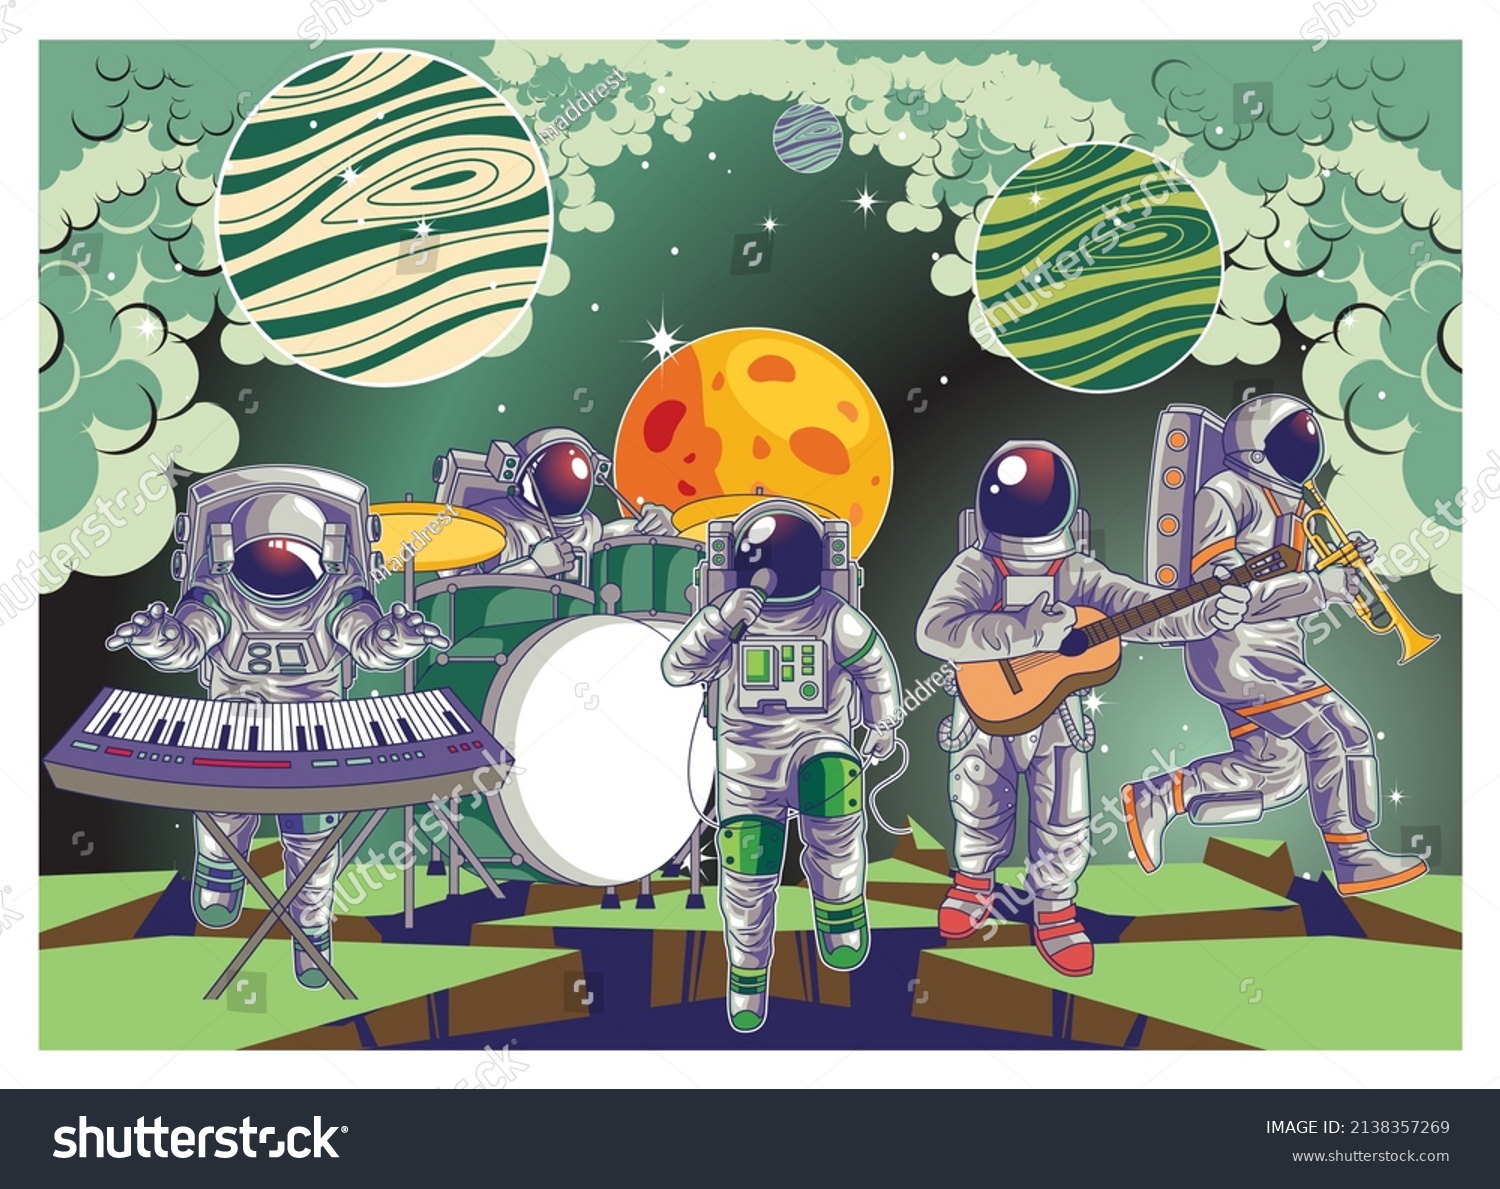 SVG of astronauts playing music in space svg